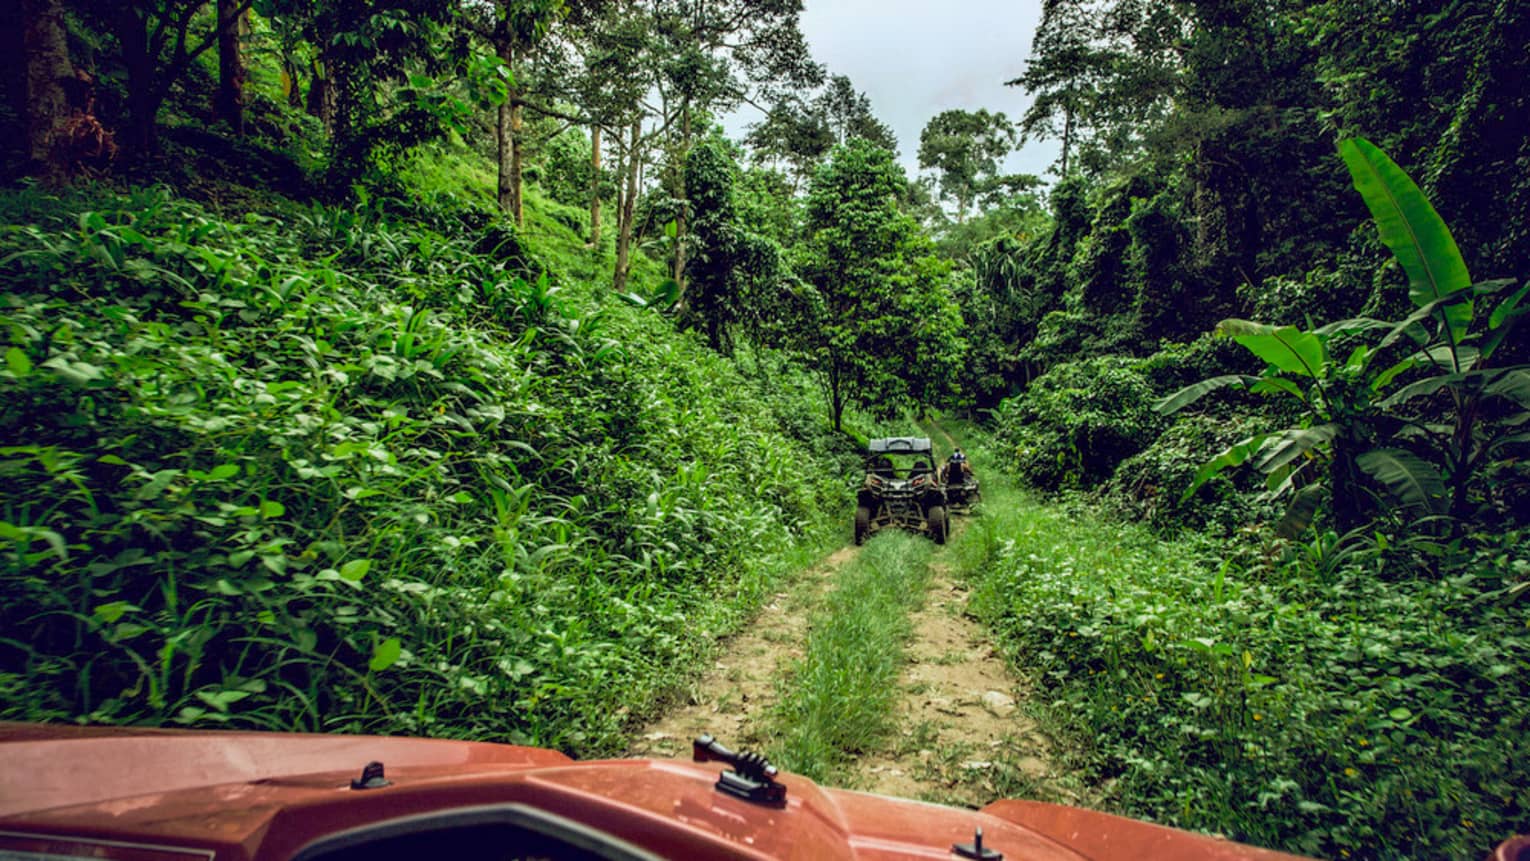 ATVs riding down dirt path in tropical forest